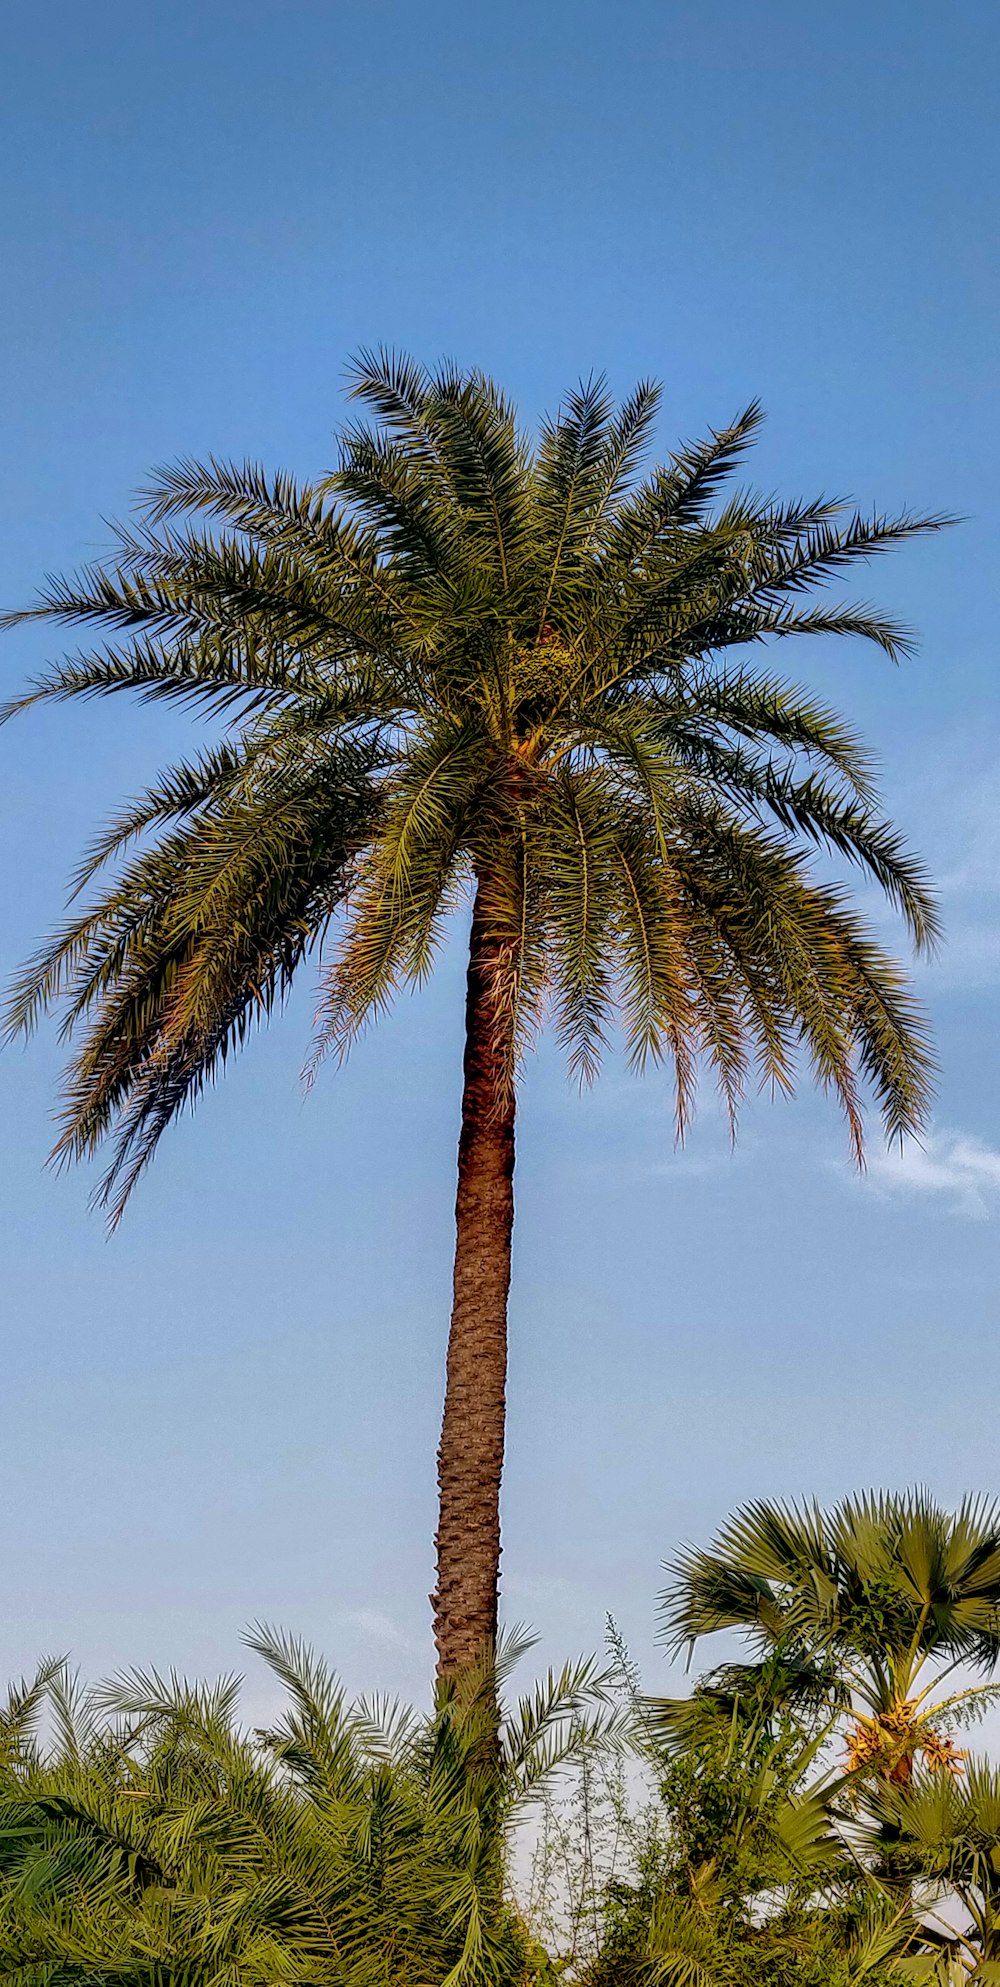 green palm tree under blue sky during daytime